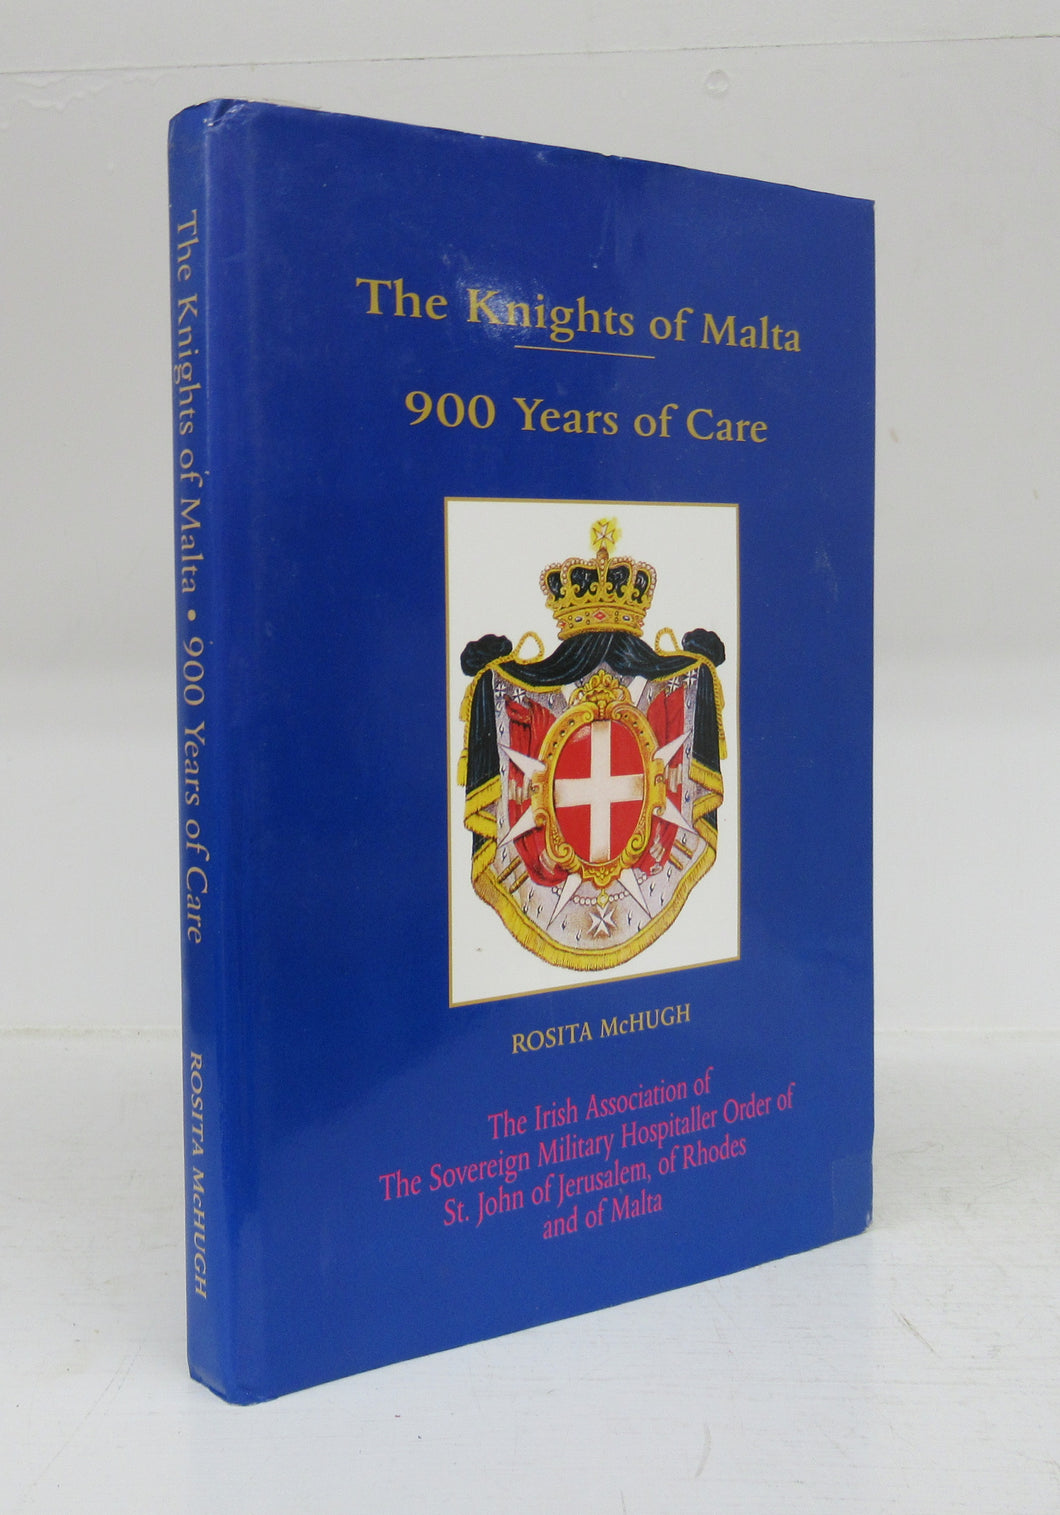 The Nights of Malta: 900 Years of Care